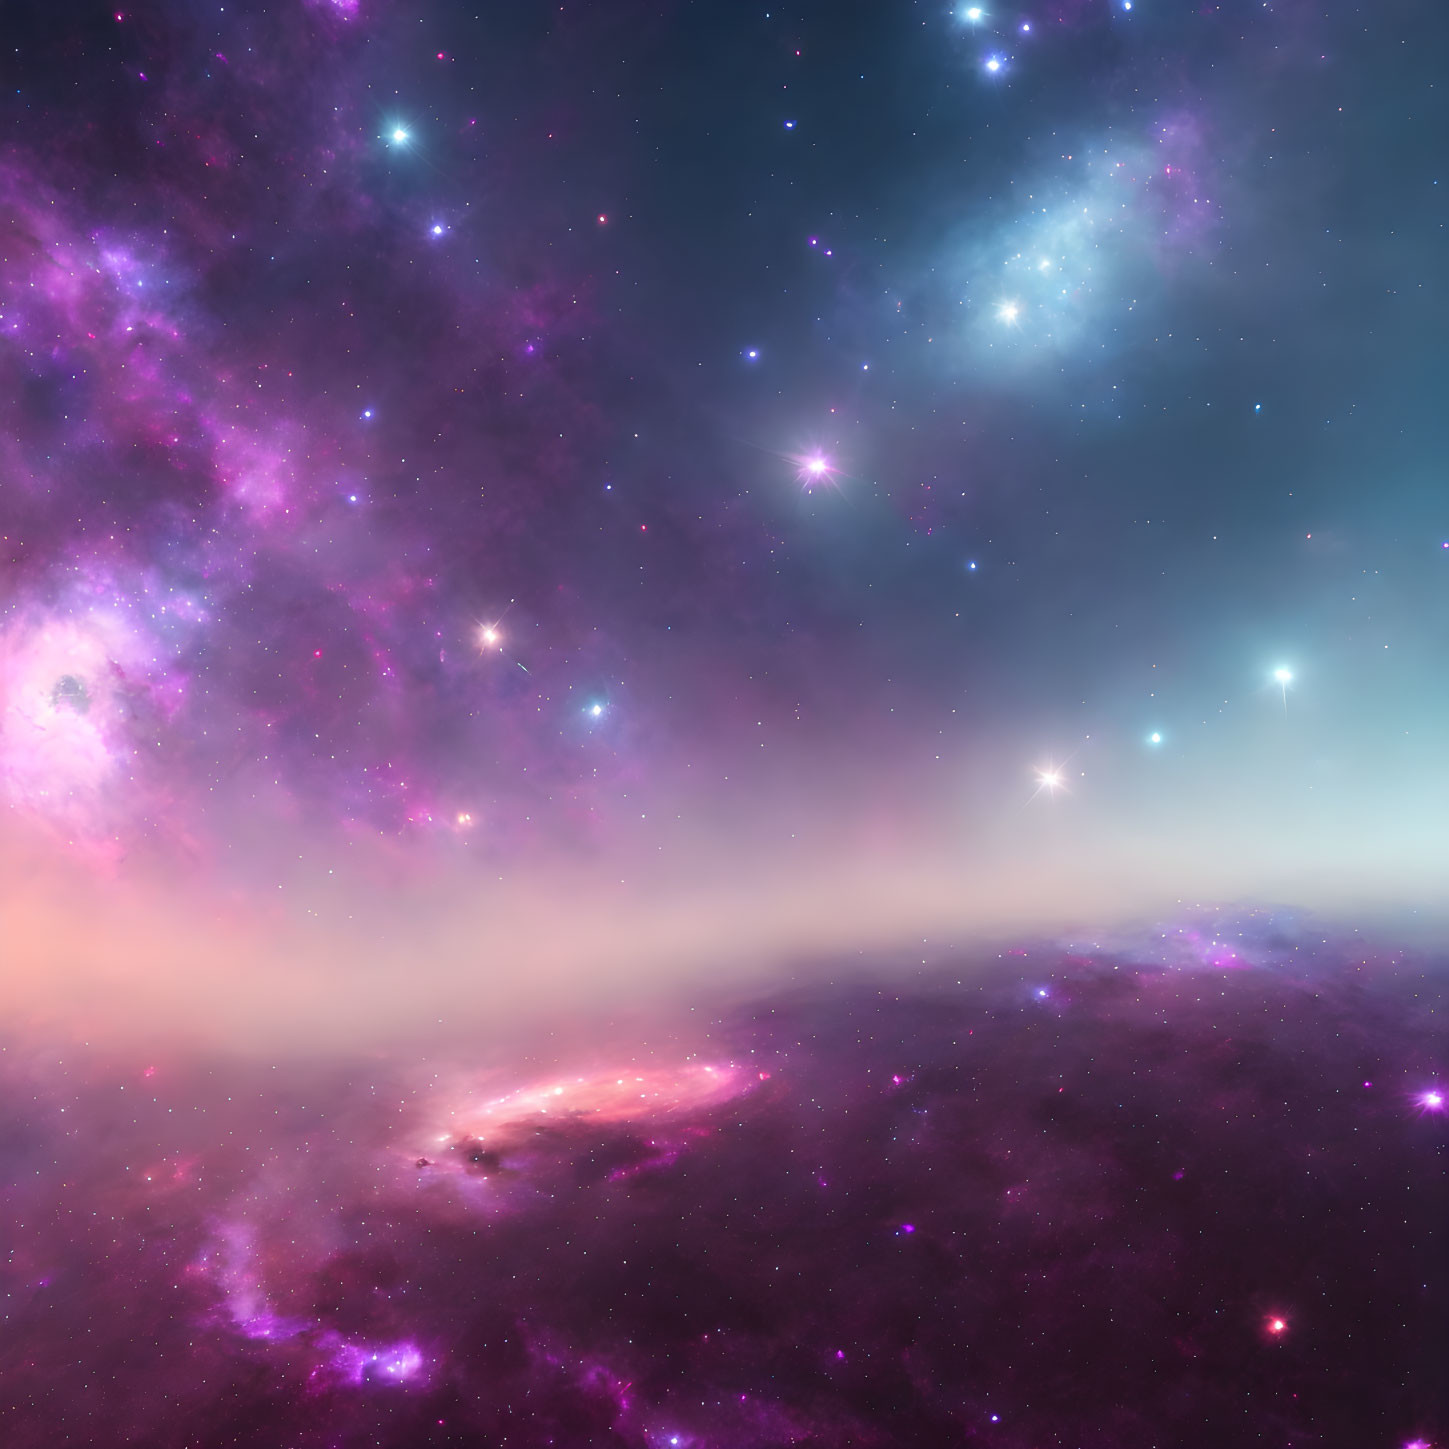 Colorful outer space scene with purple and pink nebulous clouds and glowing celestial bodies